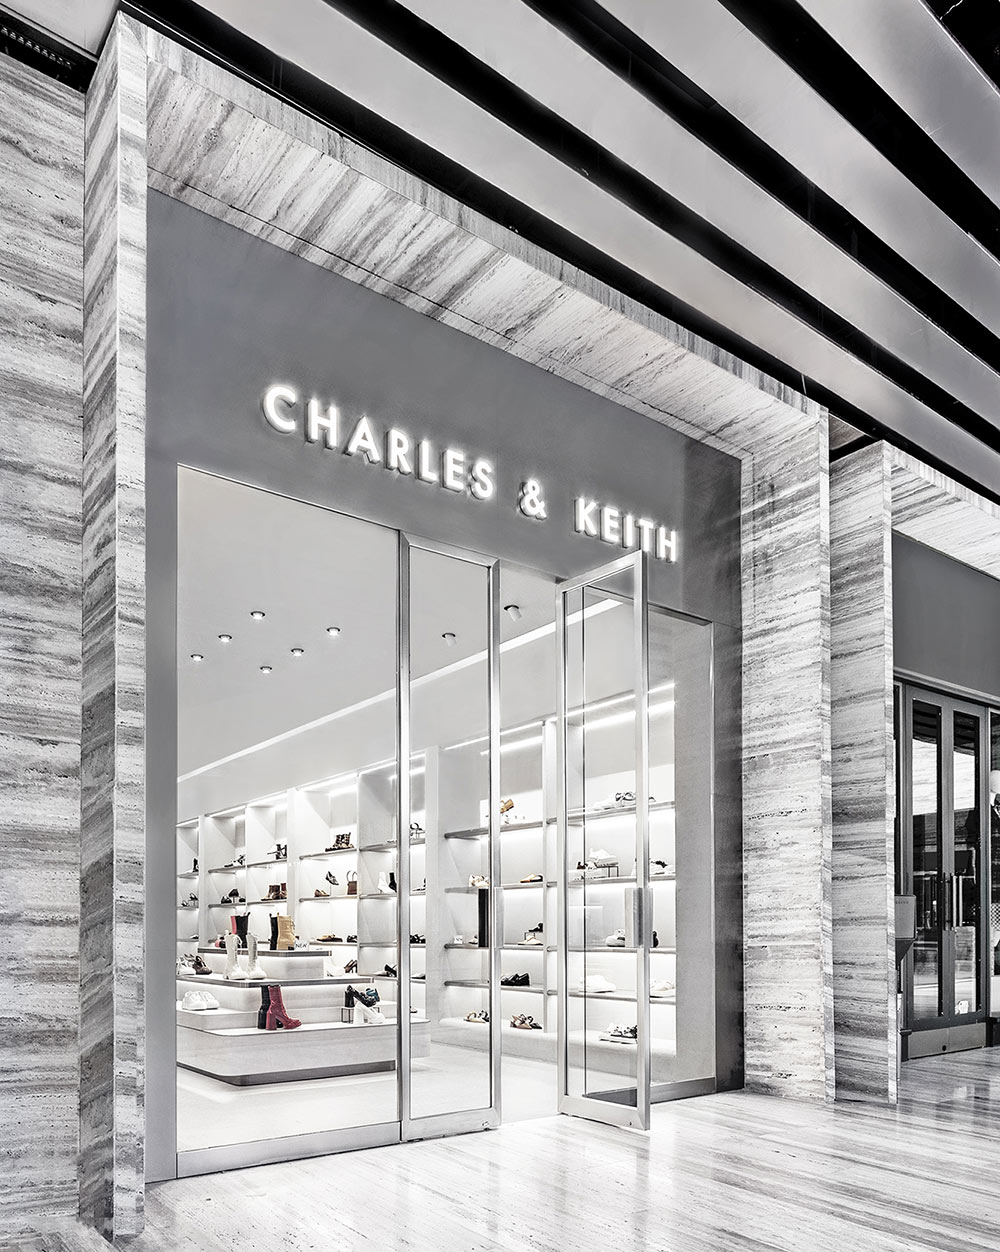 Established in 1996 by brothers Charles and Keith Wong, the